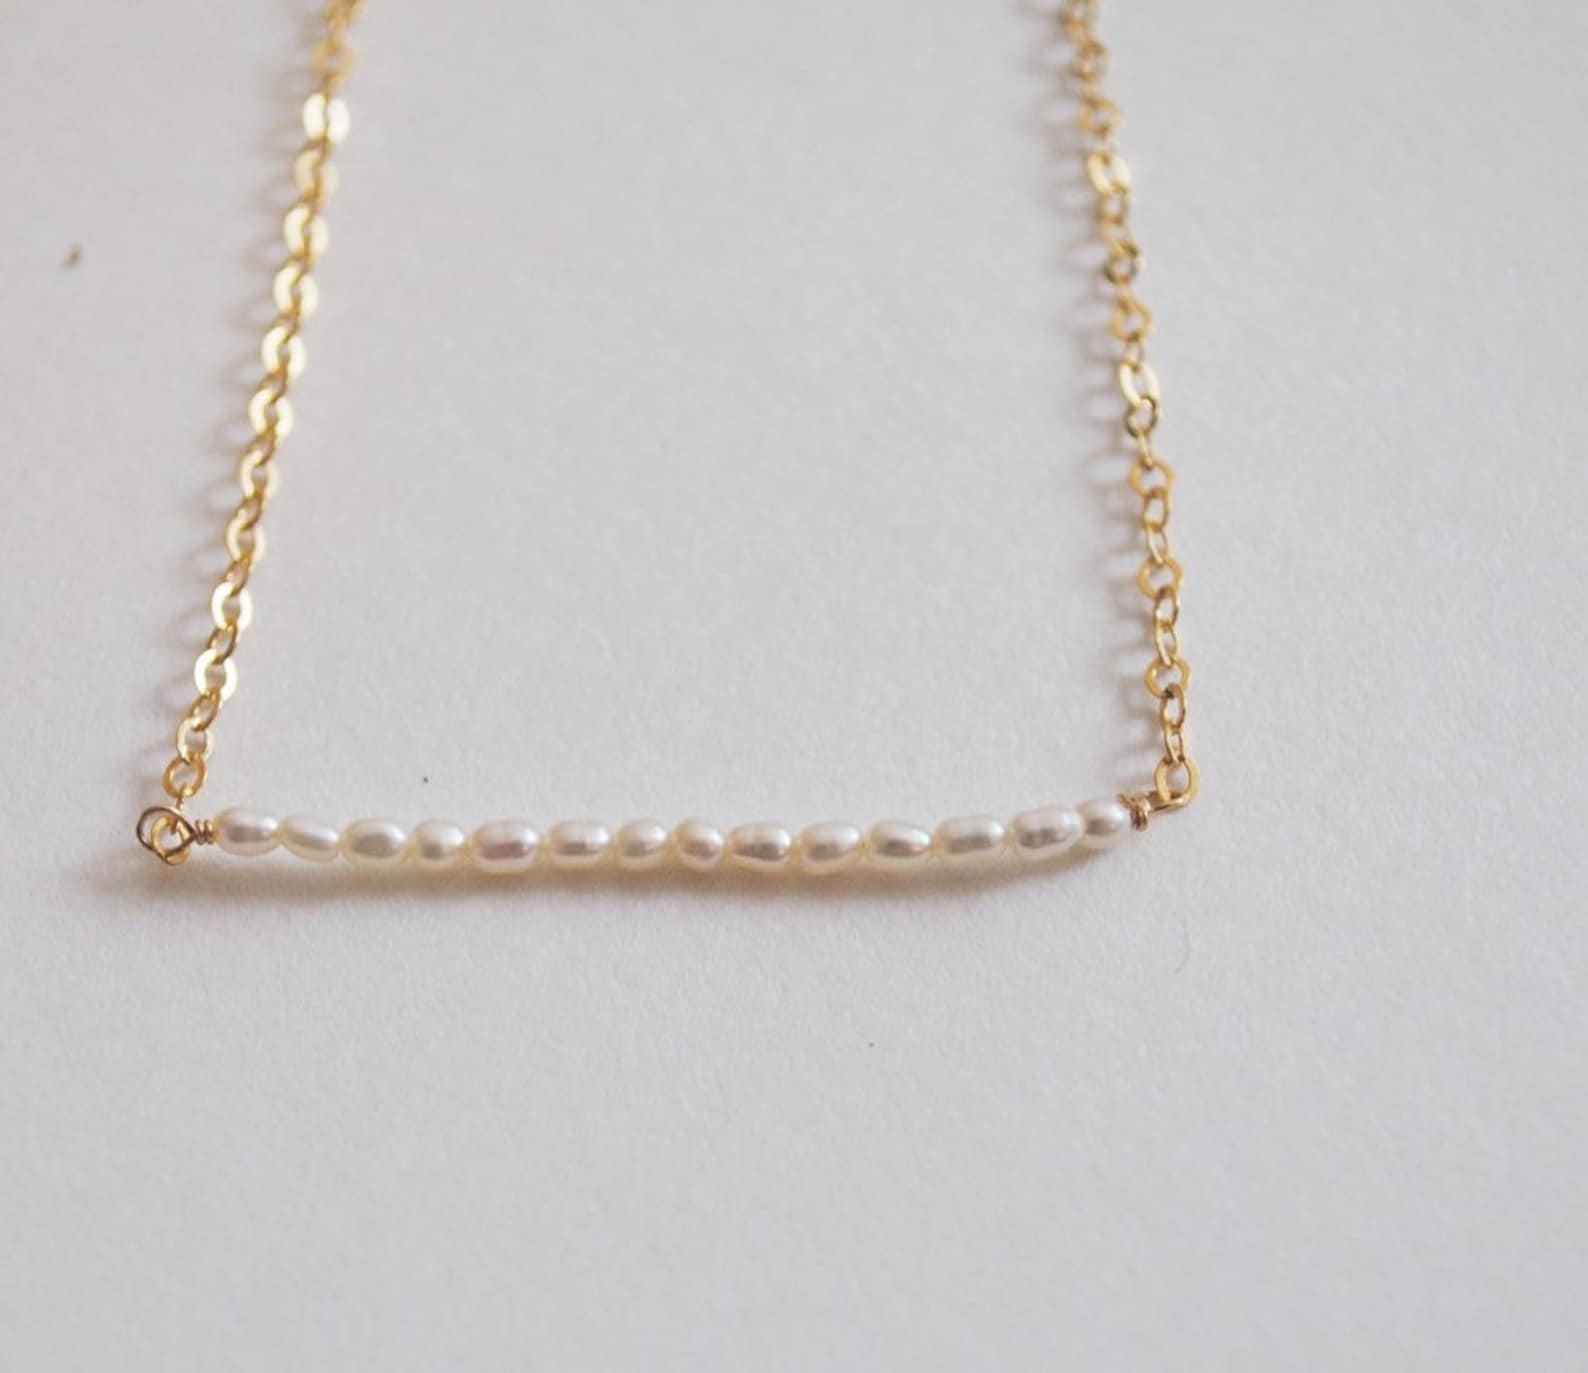 Dainty freshwater Pearl bar necklace minimalist 14k gold-fill sterling silver Necklace Seaflower Jewelry   